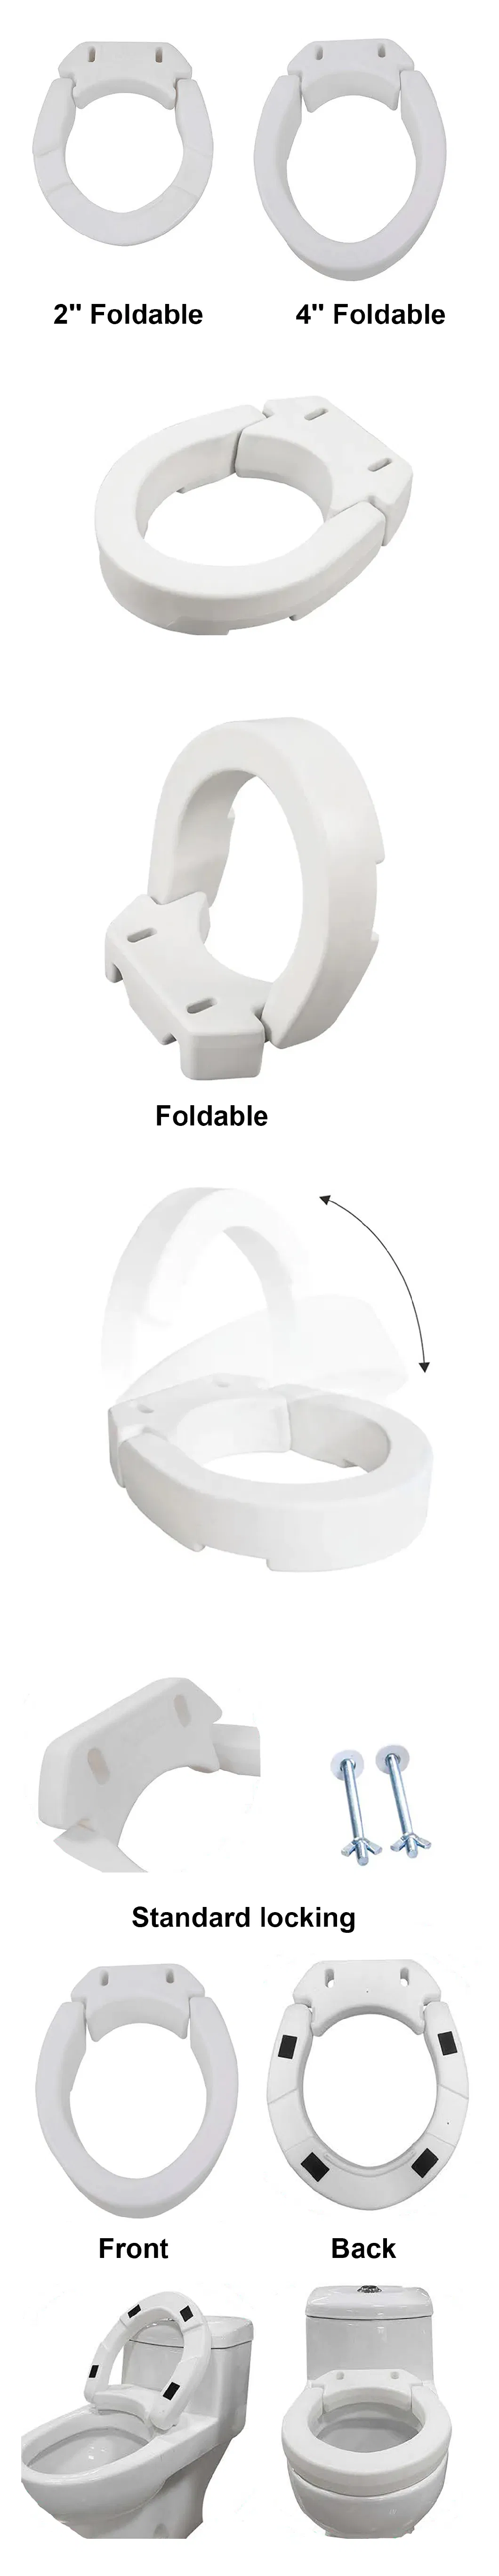 Standard 2&prime; &prime; Us-Style Raised Toilet Seat Elevator with Handles Commode Chair Safety